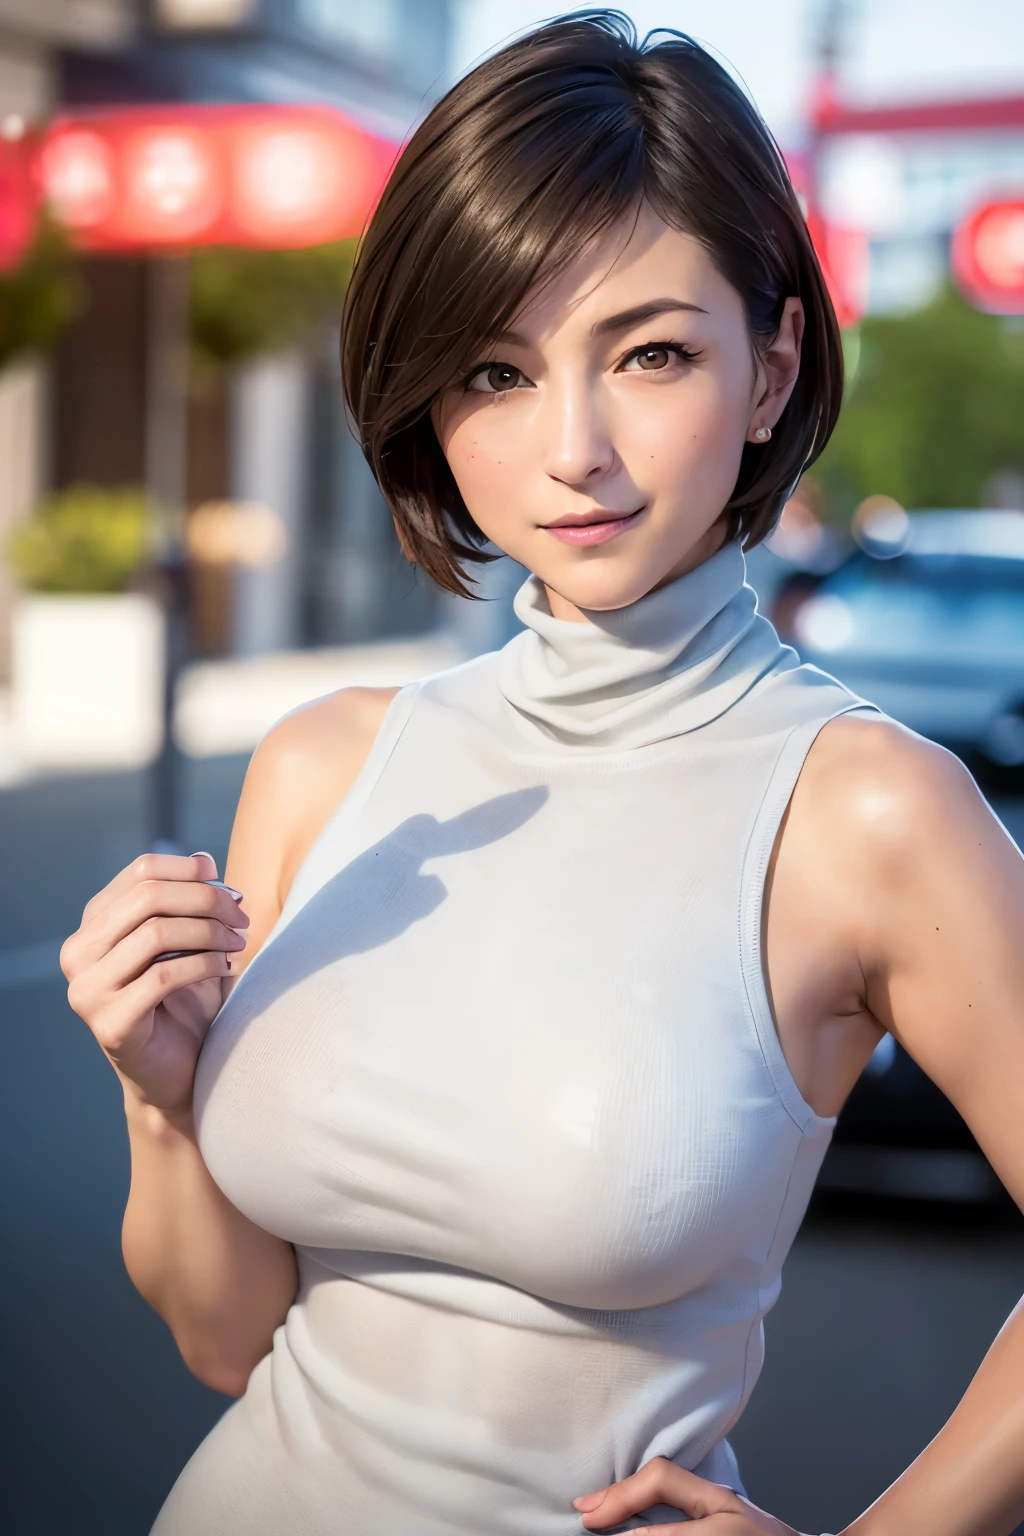 (highest quality, Tabletop, Anatomically correct, Super detailed, 8k))), ((Photorealistic, Canon, debt/1.2, 135mm, (((Burstingly Big Breasts))),Light on the face:1.5,Japanese Gravure, Pretty woman with short hair that falls over her ears)), ,((Tight abdomen))、Beautiful double eyelids, Beautiful, shining lips, Well-proportioned, feminine and attractive body, (Virgin Killer white Sweater:1.3),((Grey Turtleneck Sleeveless Dress、Tank tops that expose the chest from the side,debt cup bust peeking out from wide open cuffs)), Light brown hair, (First Person View, date, On the street、Laughter), Show your armpits, Sexy armpits、debtull open armpits